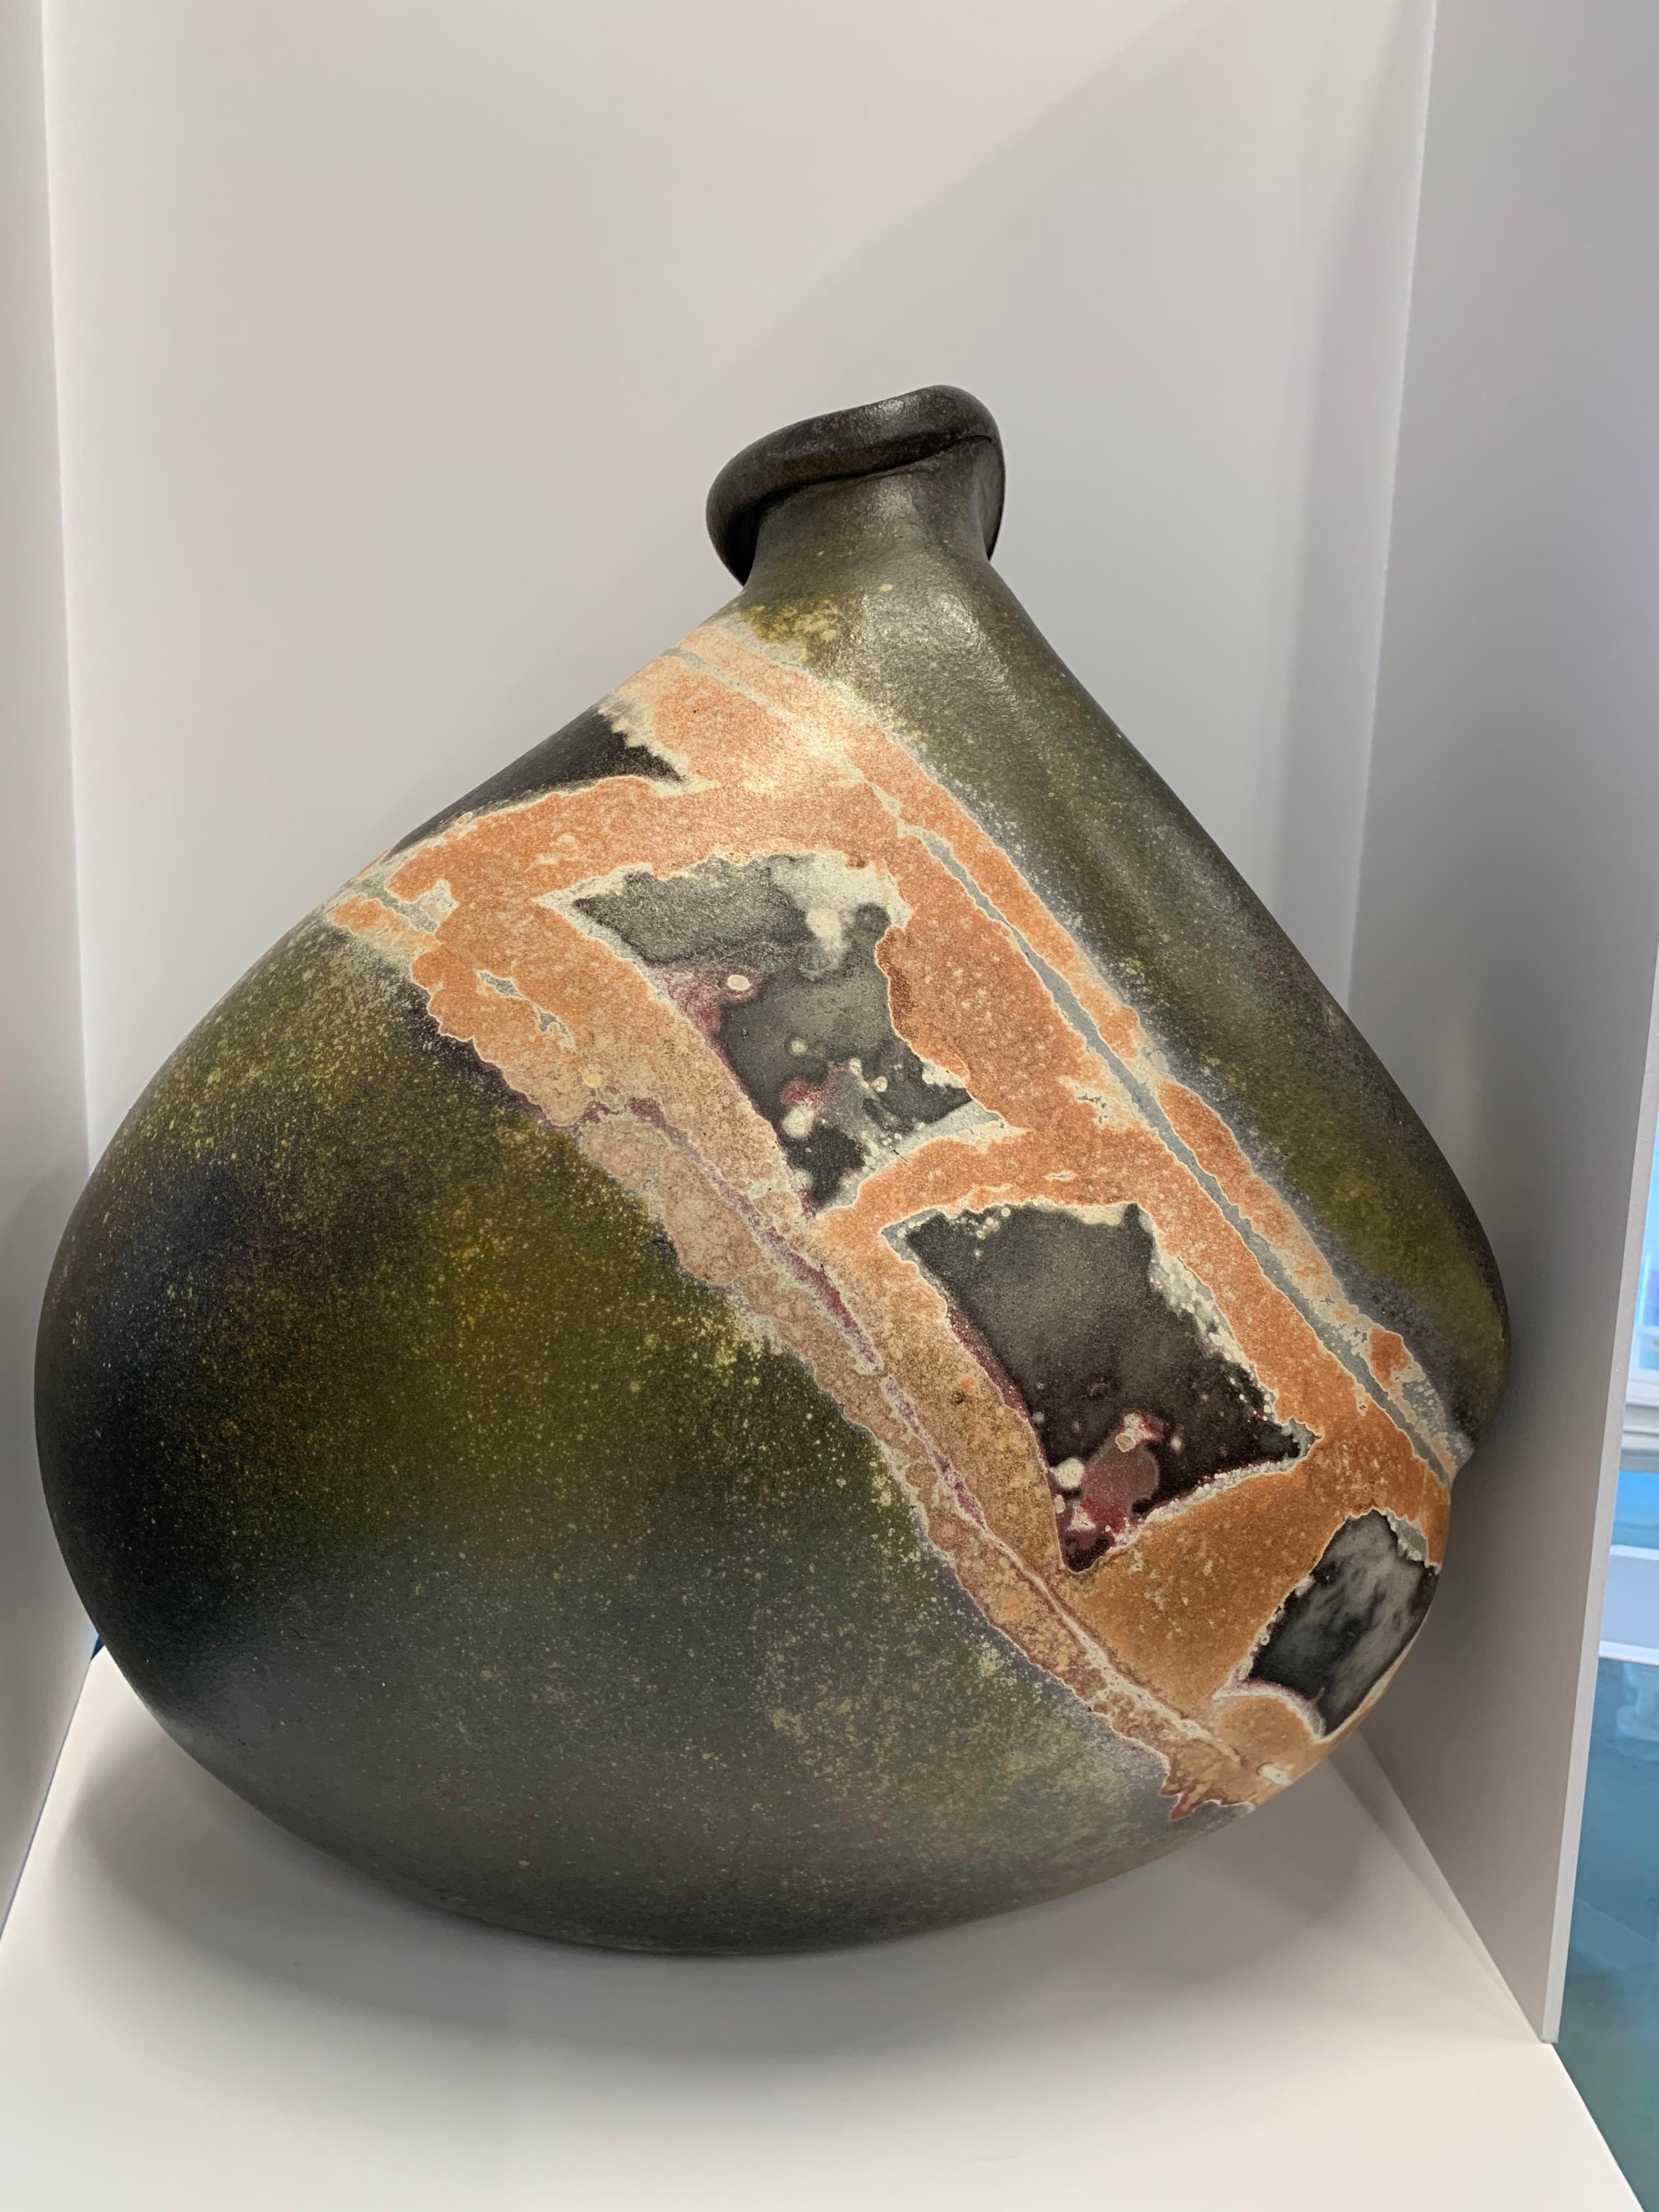 A large bulbous and nicely decorated pottery vase. Signed on the base. Likely from the late 20th century. In good condition with only some minor glaze imperfections in the firing process.